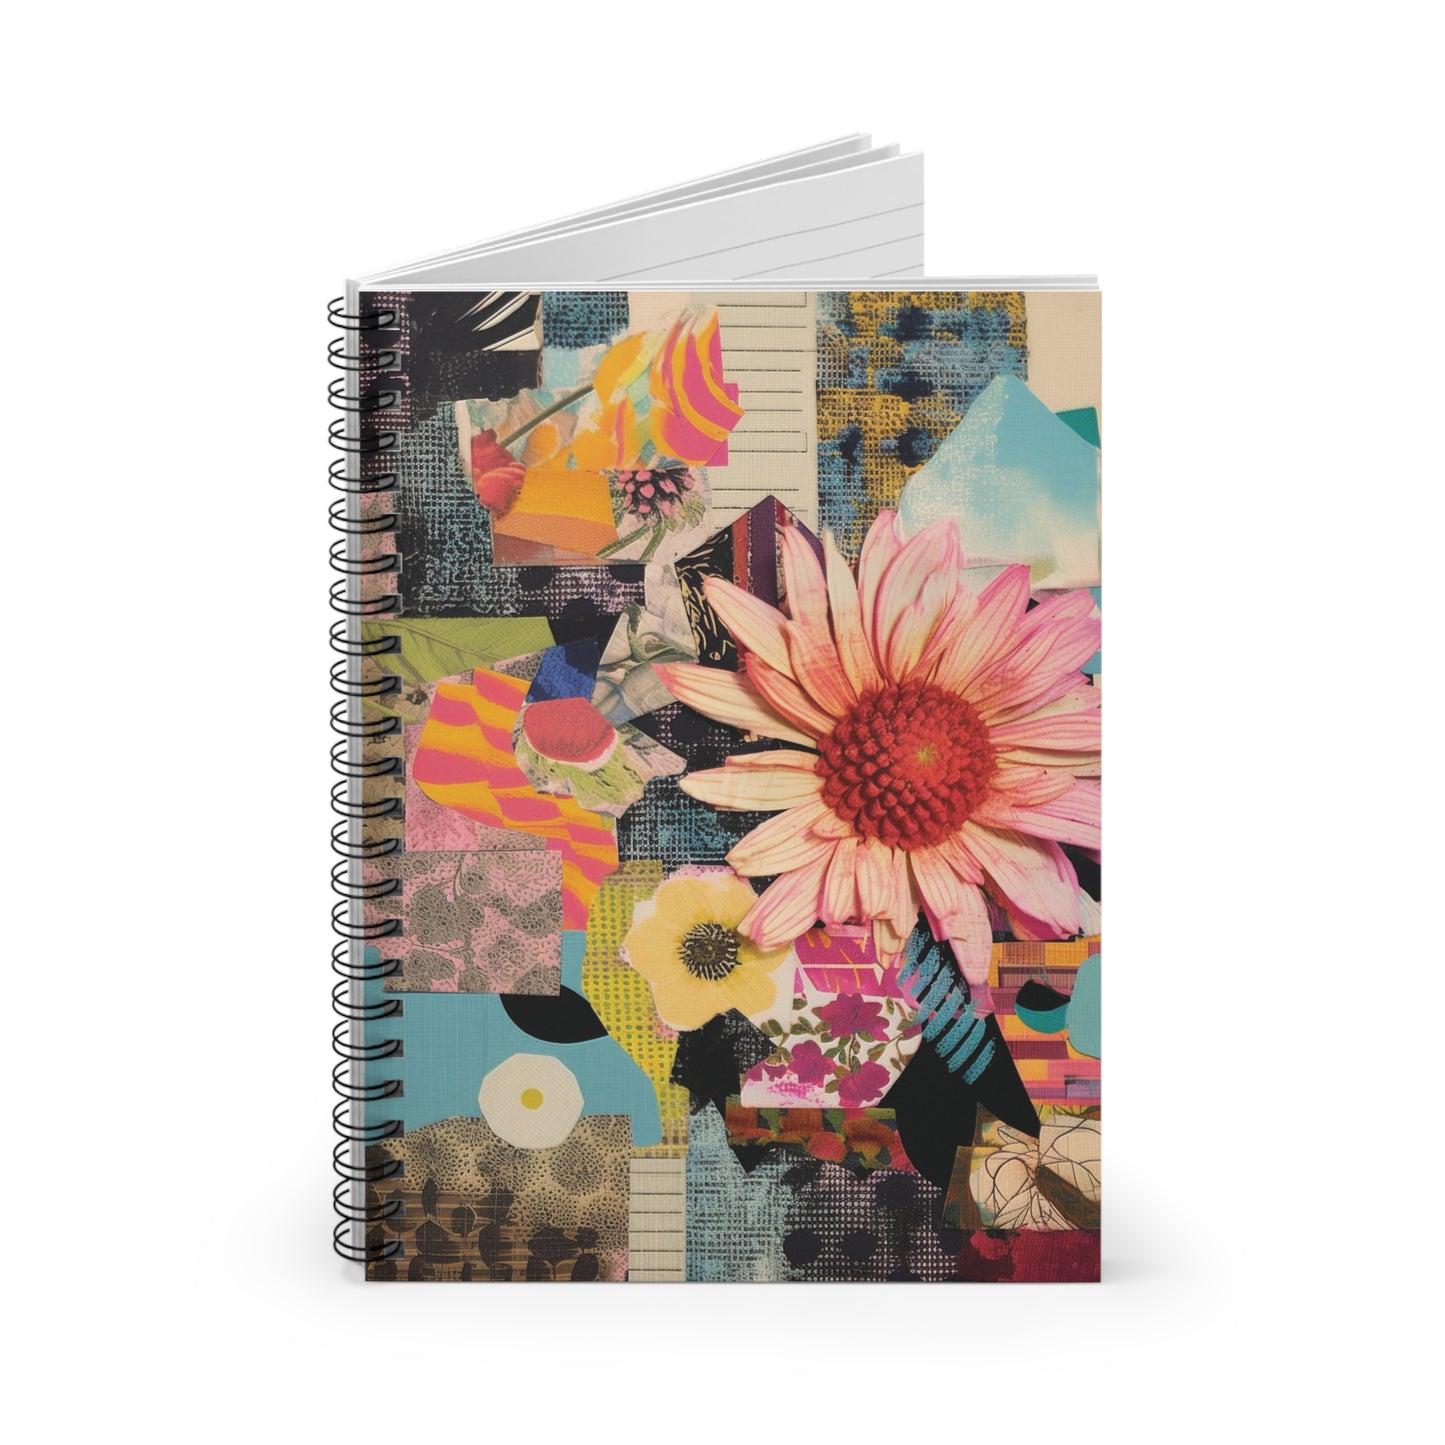 Floral Collage Art Notebook (3) - Composition Notebook, Spiral Notebook, Journal for Writing and Note-Taking